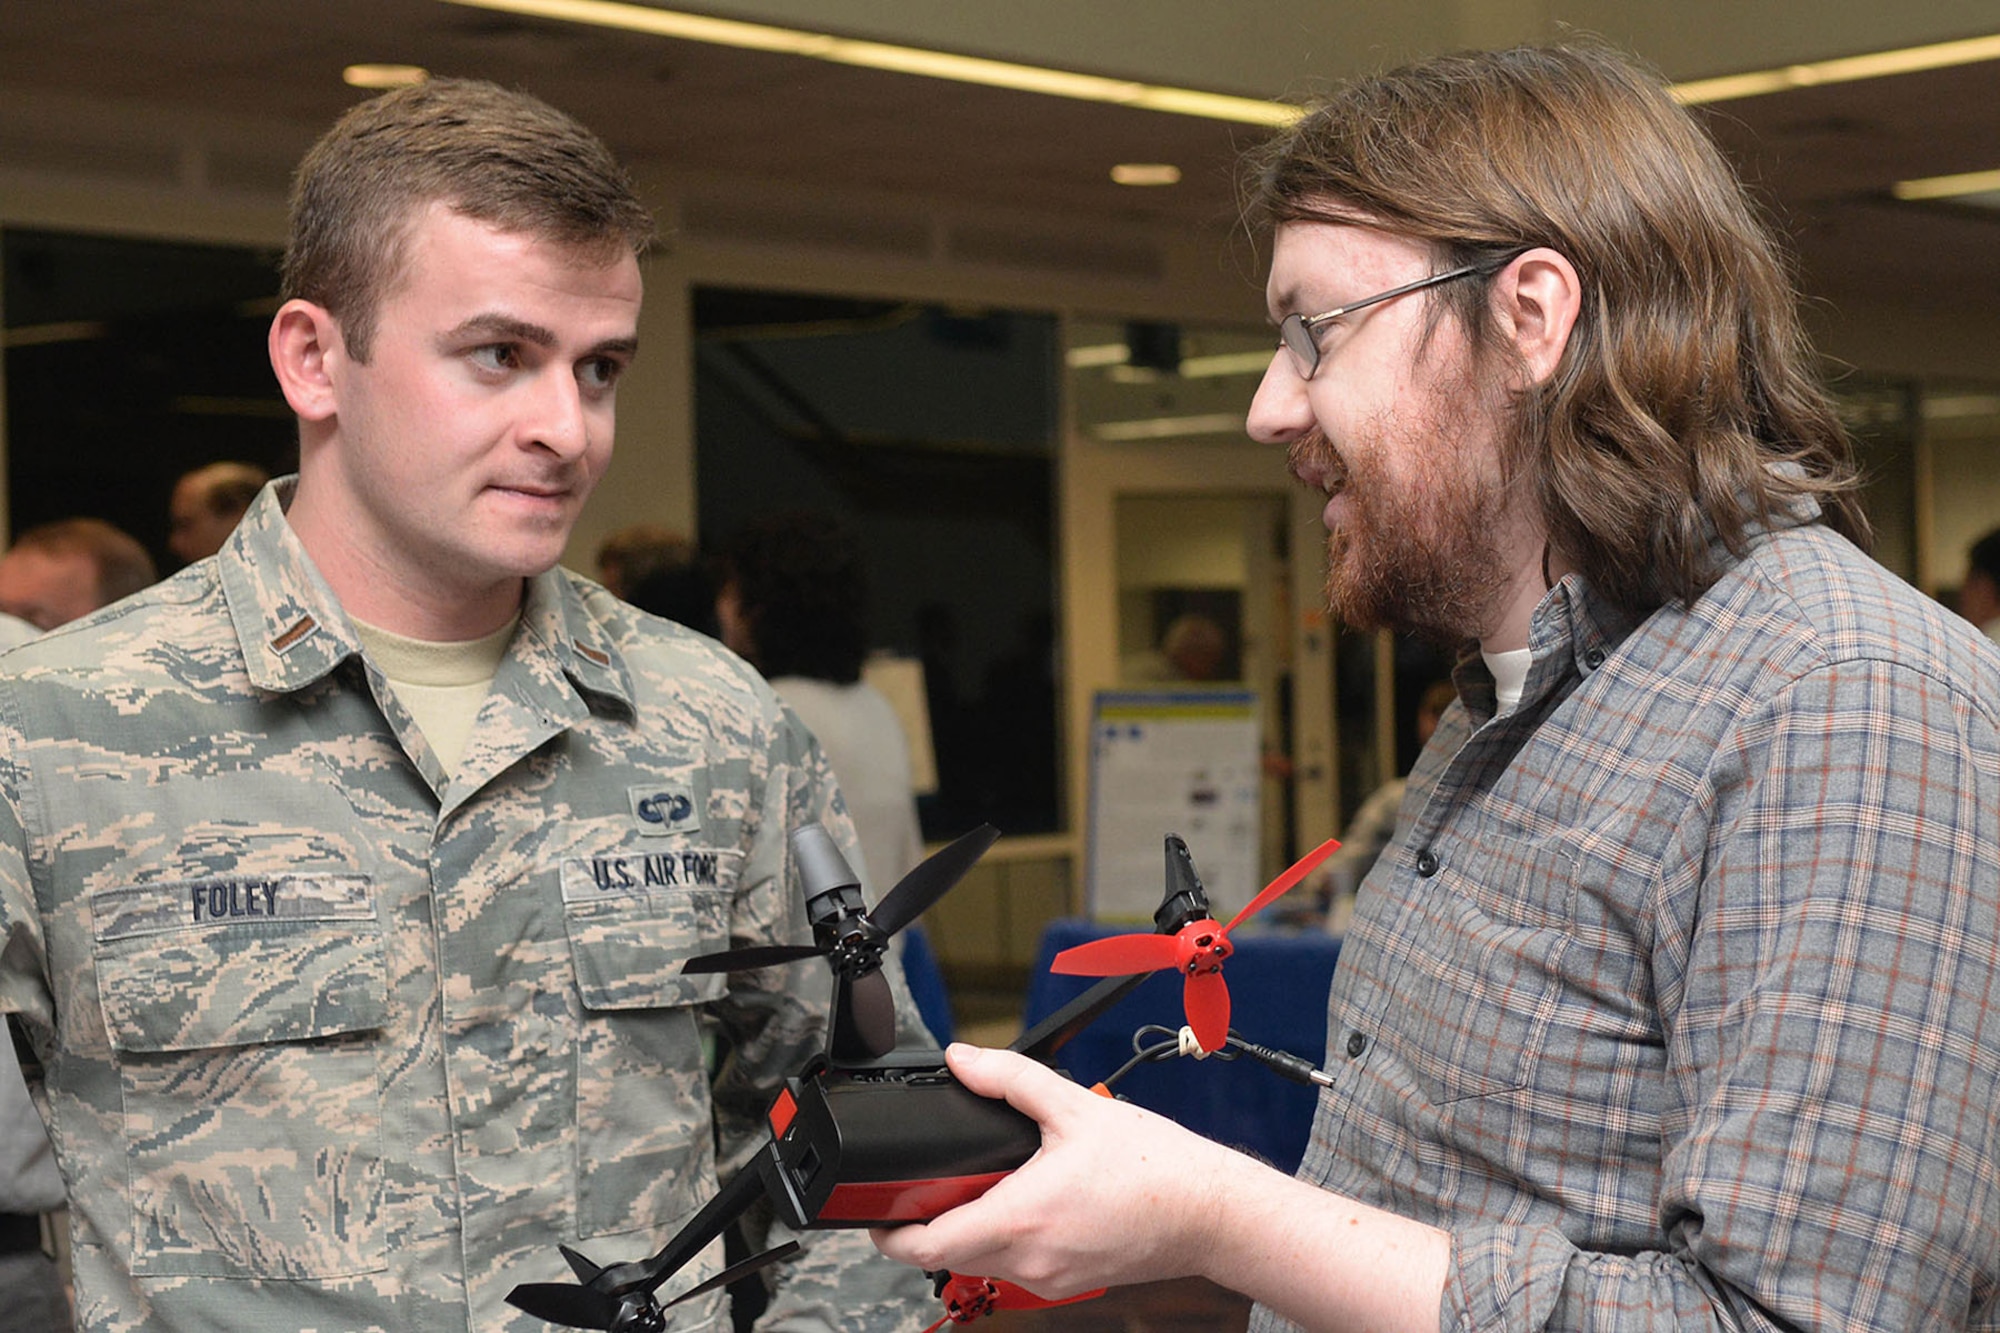 Second Lt. Michael Foley, Engineering and Technical Management executive officer, speaks to Neal Humphrey, MITRE communications engineer and principal
investigator, about robust communications protocols for airborne multi-agent robotic
systems of unmanned aerial vehicles during an Innovation Exchange April 26 in the Building 1612 atrium at Hanscom Air Force Base, Mass. The exchange was hosted by Hanscom's Engineering and Technical Management Directorate in conjunction with The
MITRE Corp. and offered an opportunity for information sharing in the areas
of cybersecurity, communications and networking, and the future of command
and control. (U.S. Air Force photo by Linda LaBonte Britt)
